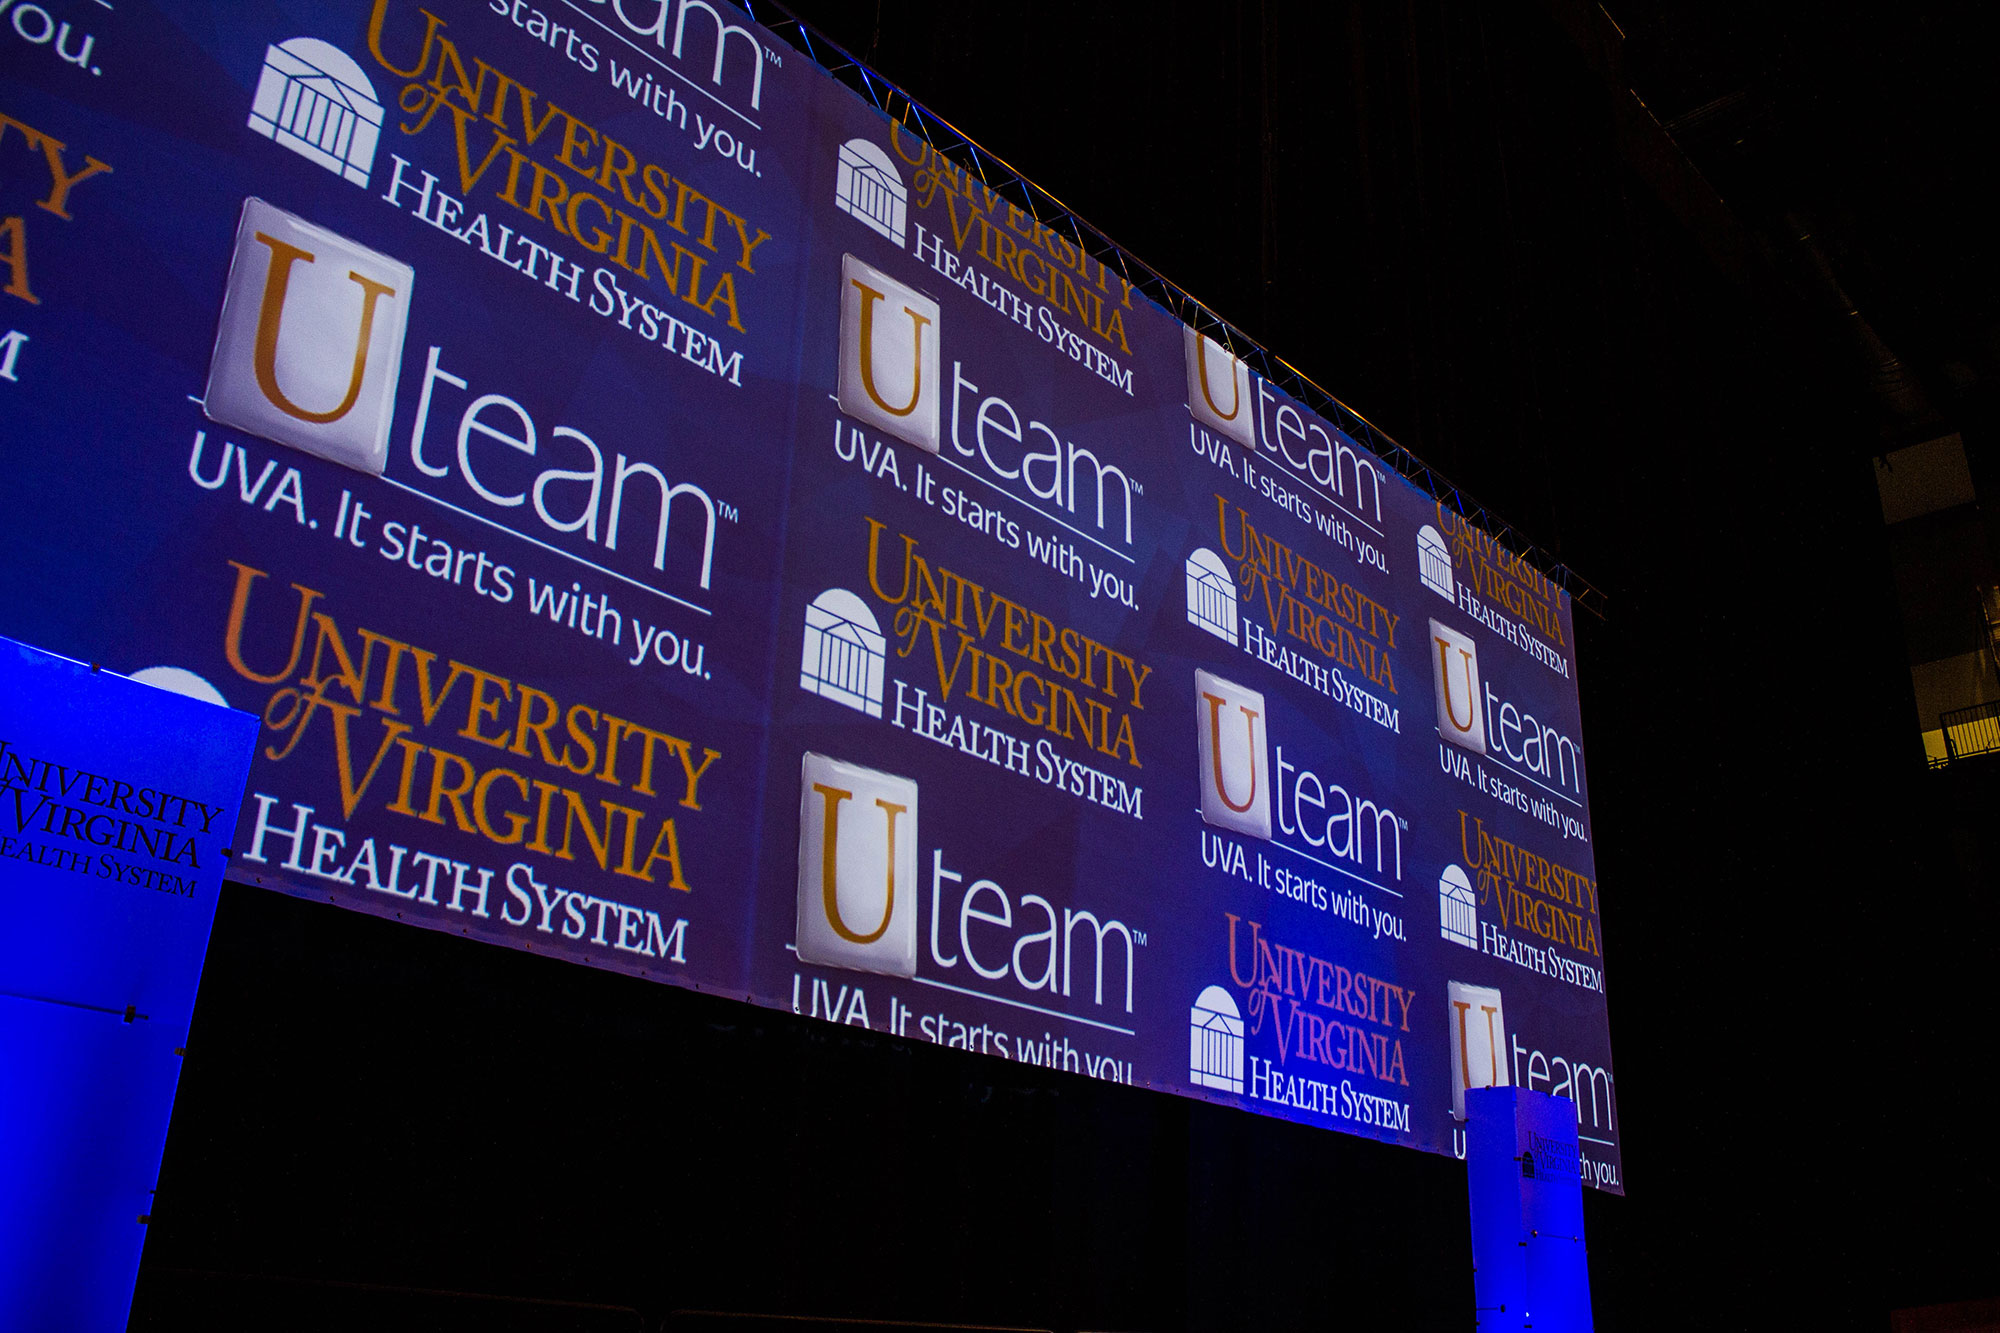 meeting-conference-projection-graphics-uva-charlottesville.jpg